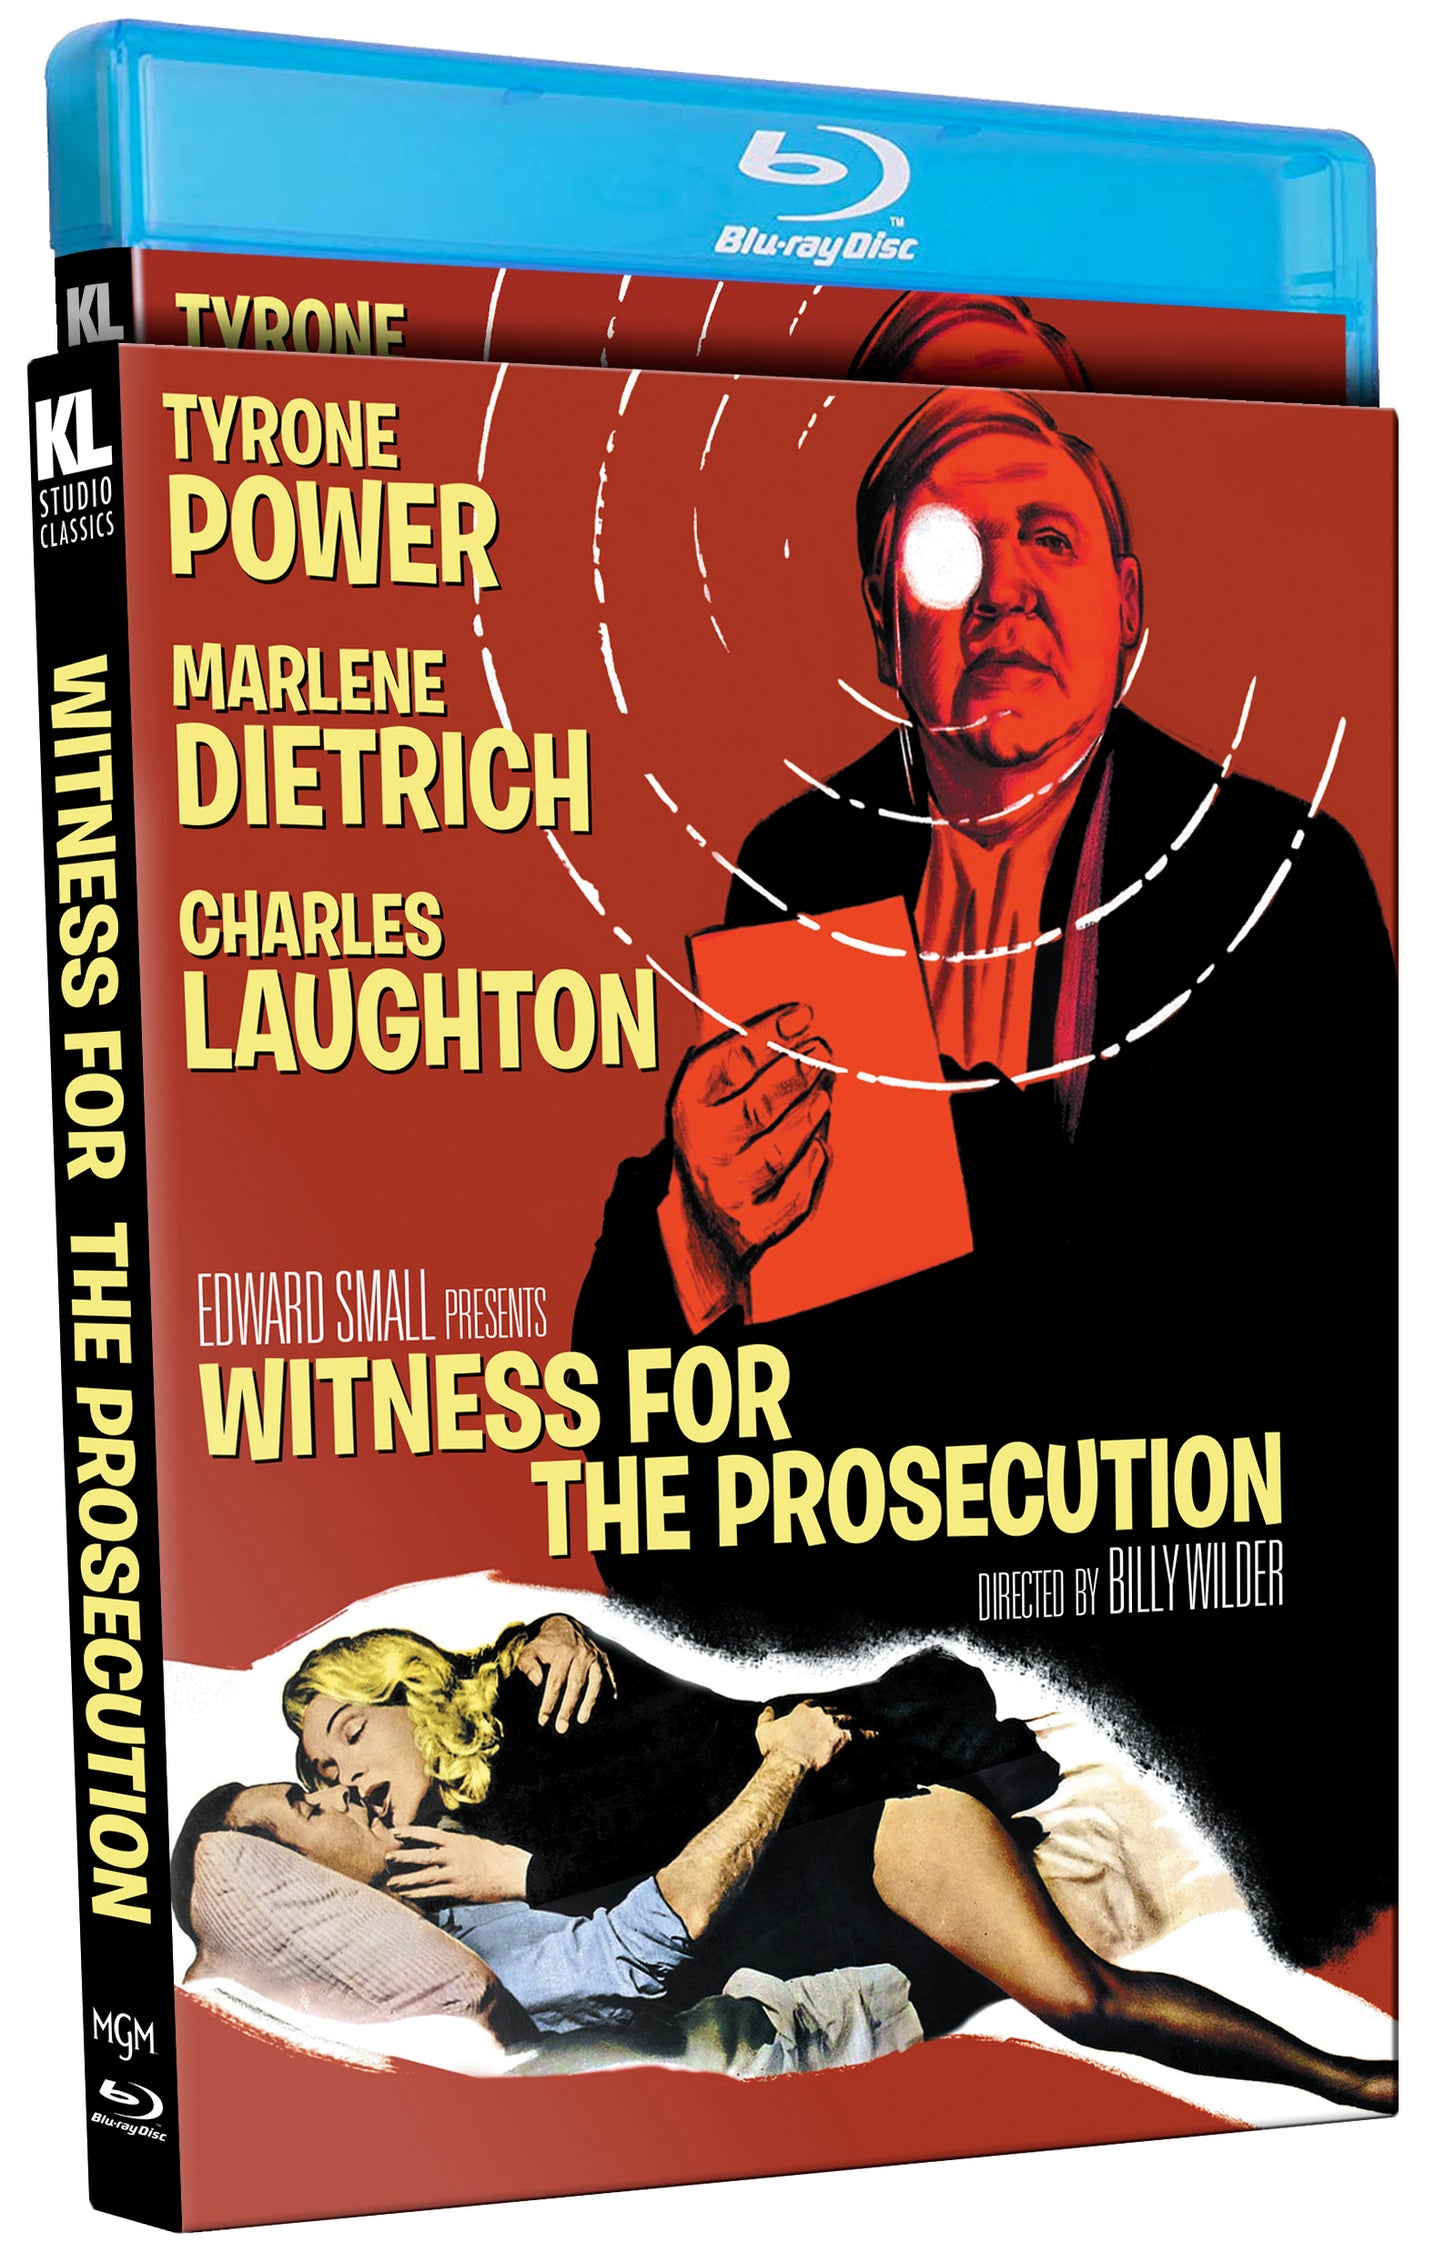 Witness for the Prosecution Kino Lorber Blu-Ray [PRE-ORDER] [SLIPCOVER]